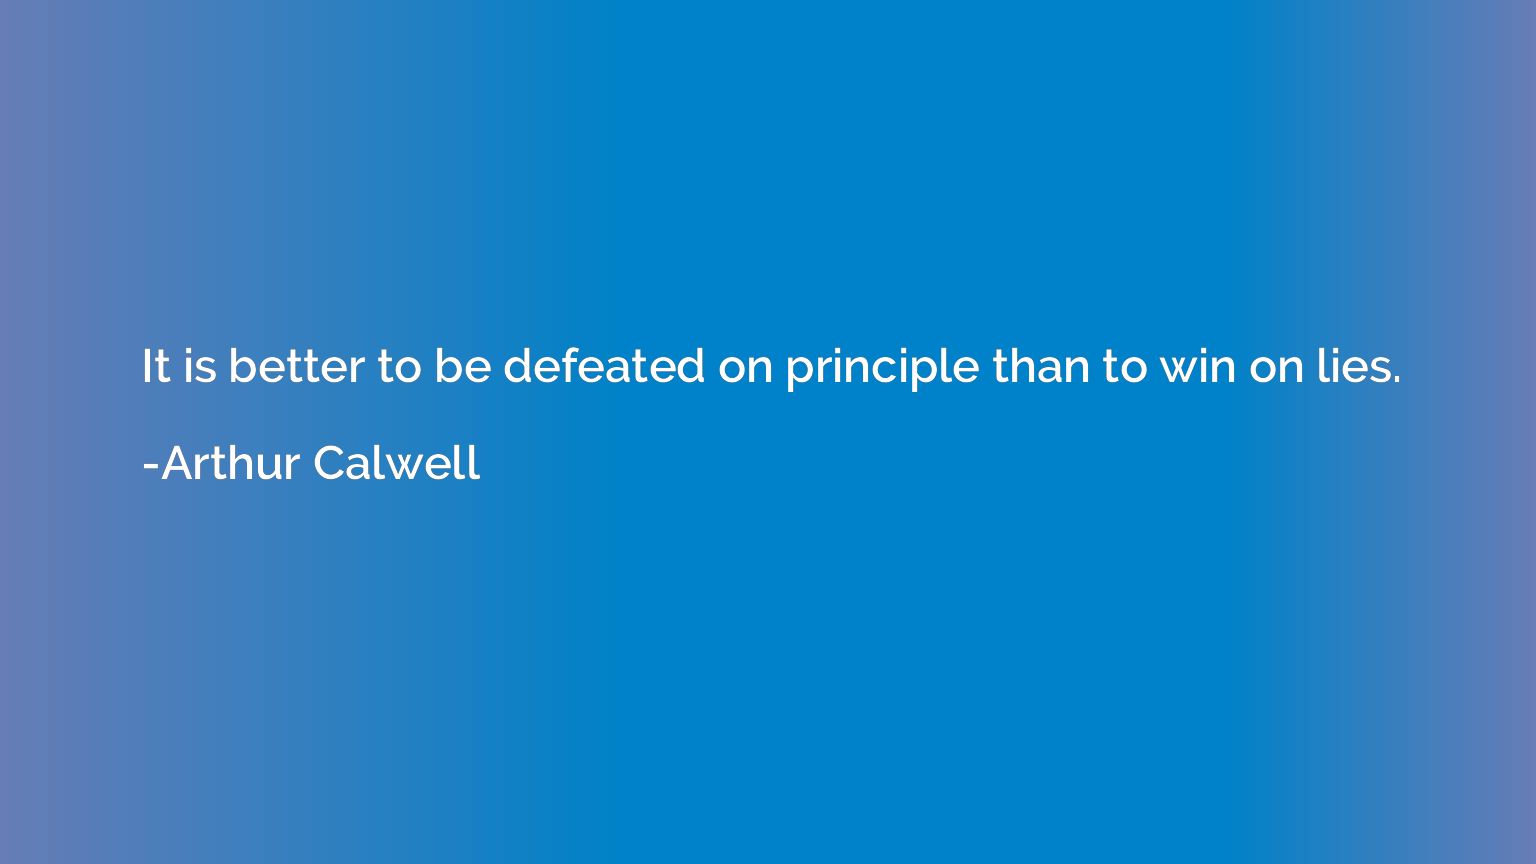 It is better to be defeated on principle than to win on lies